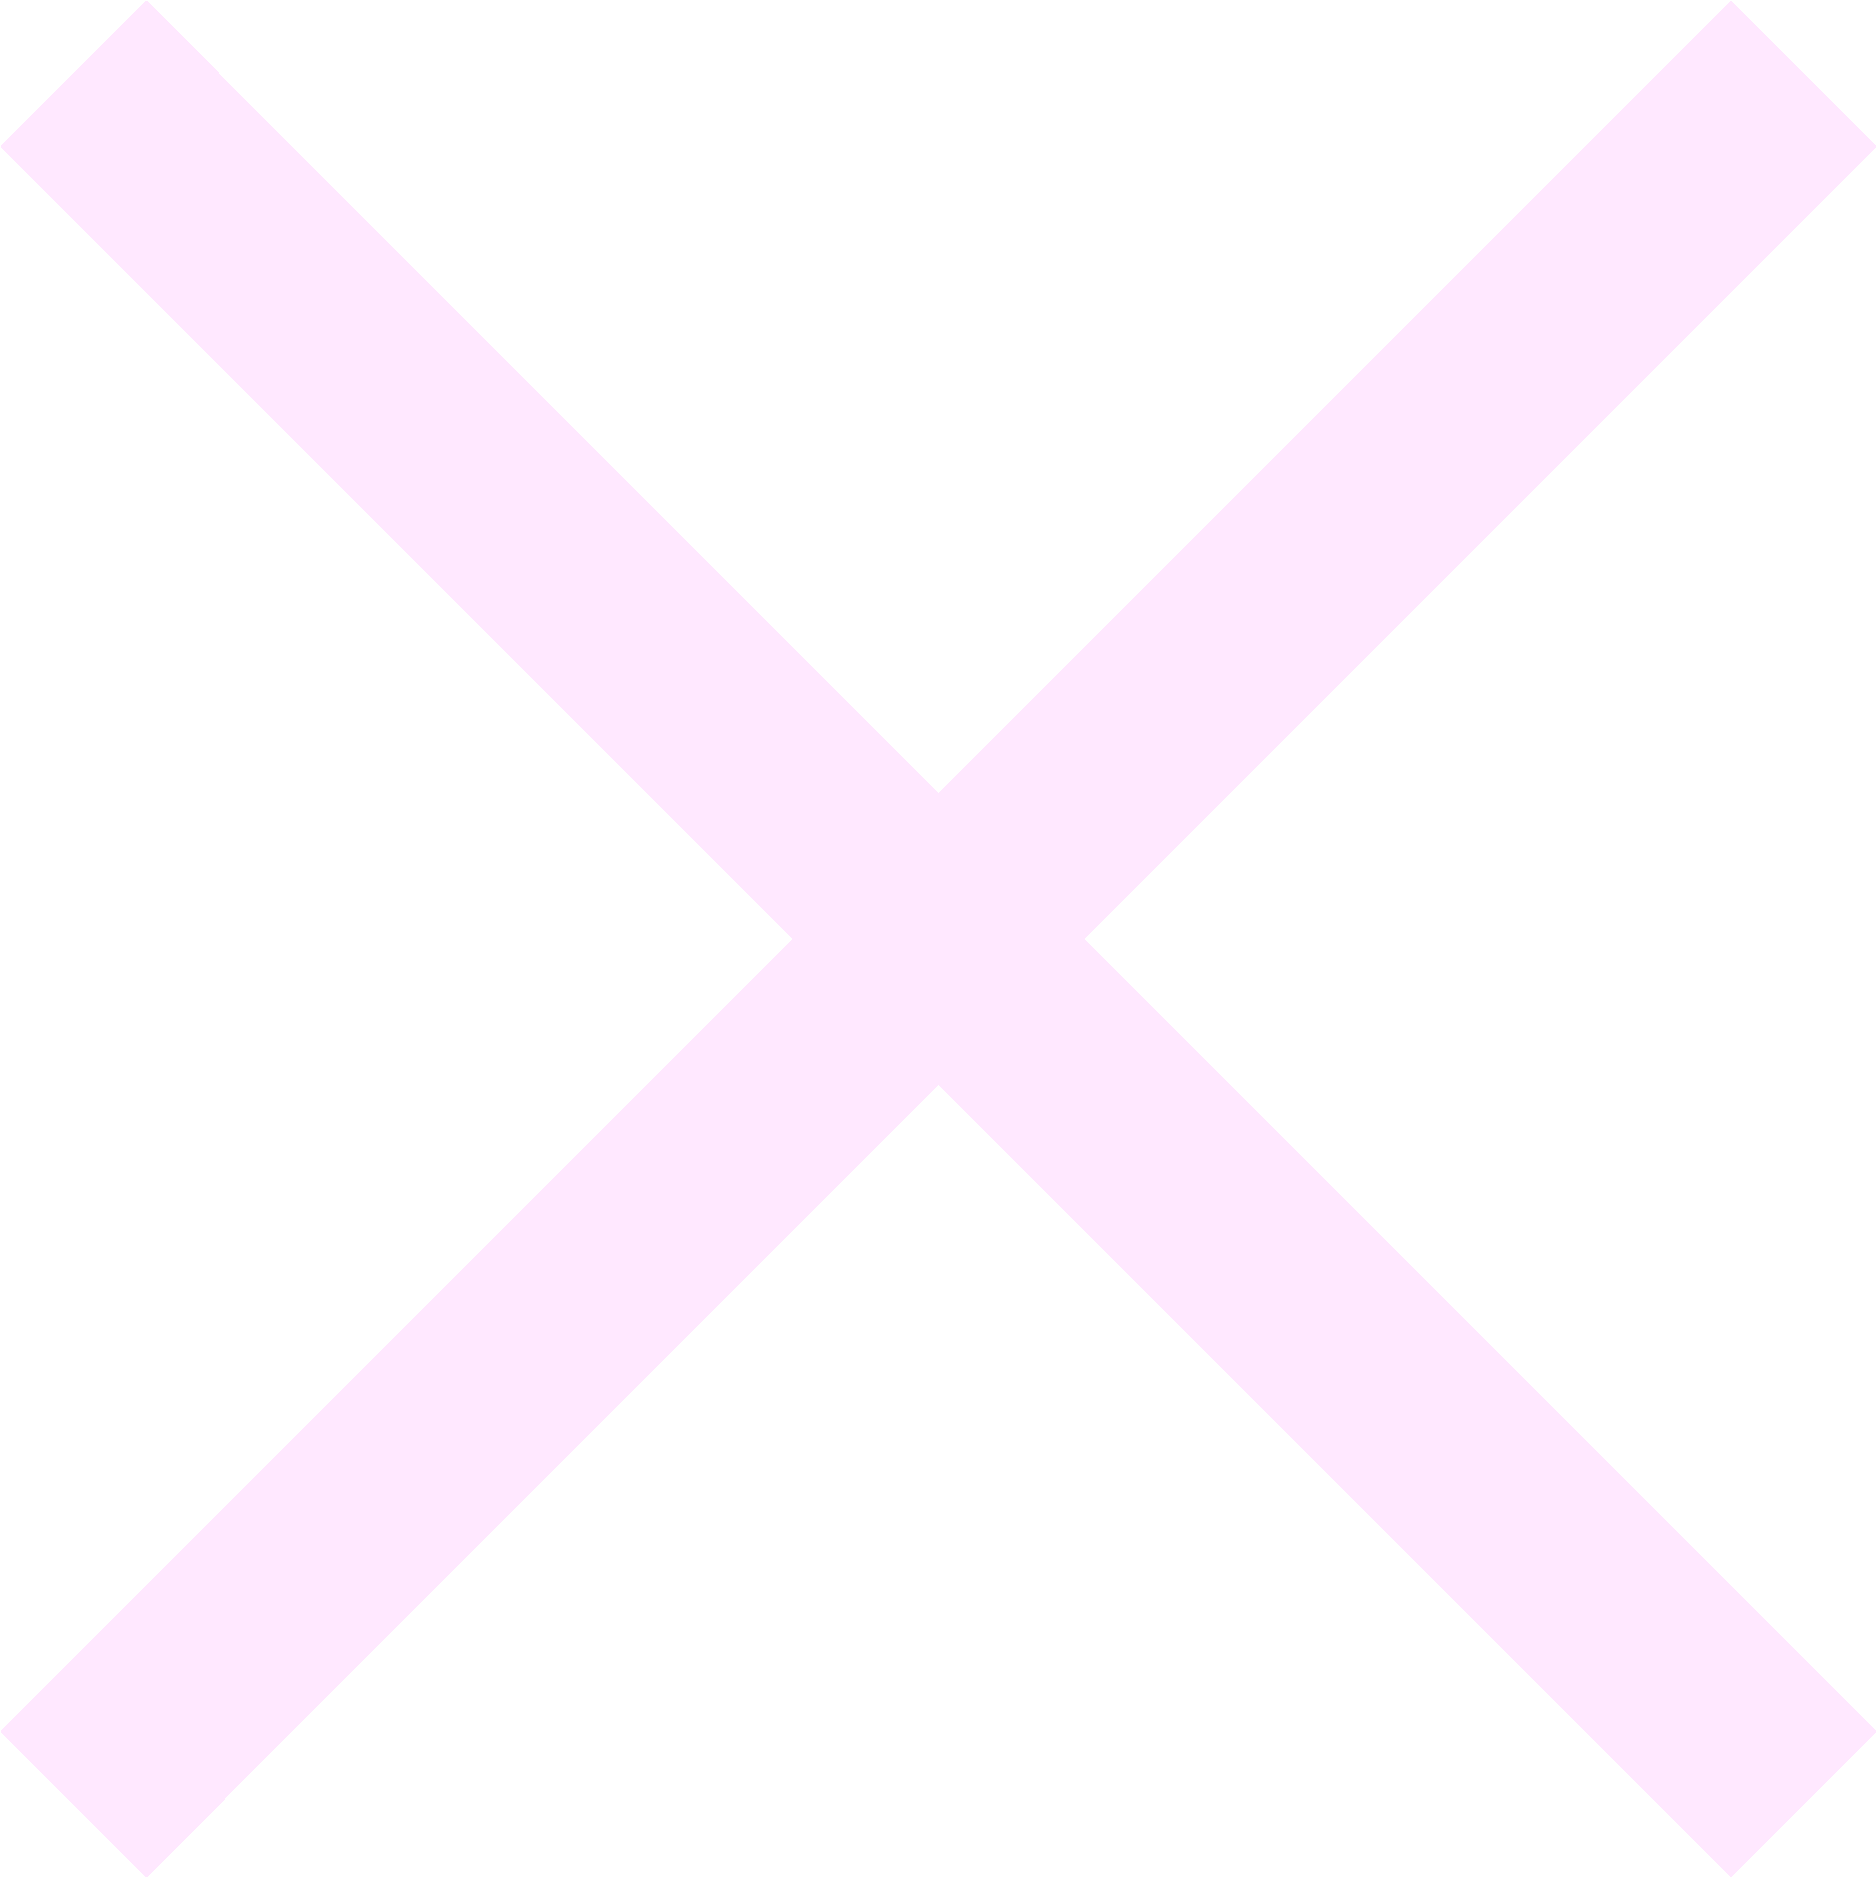 A Pink X On A Black Background